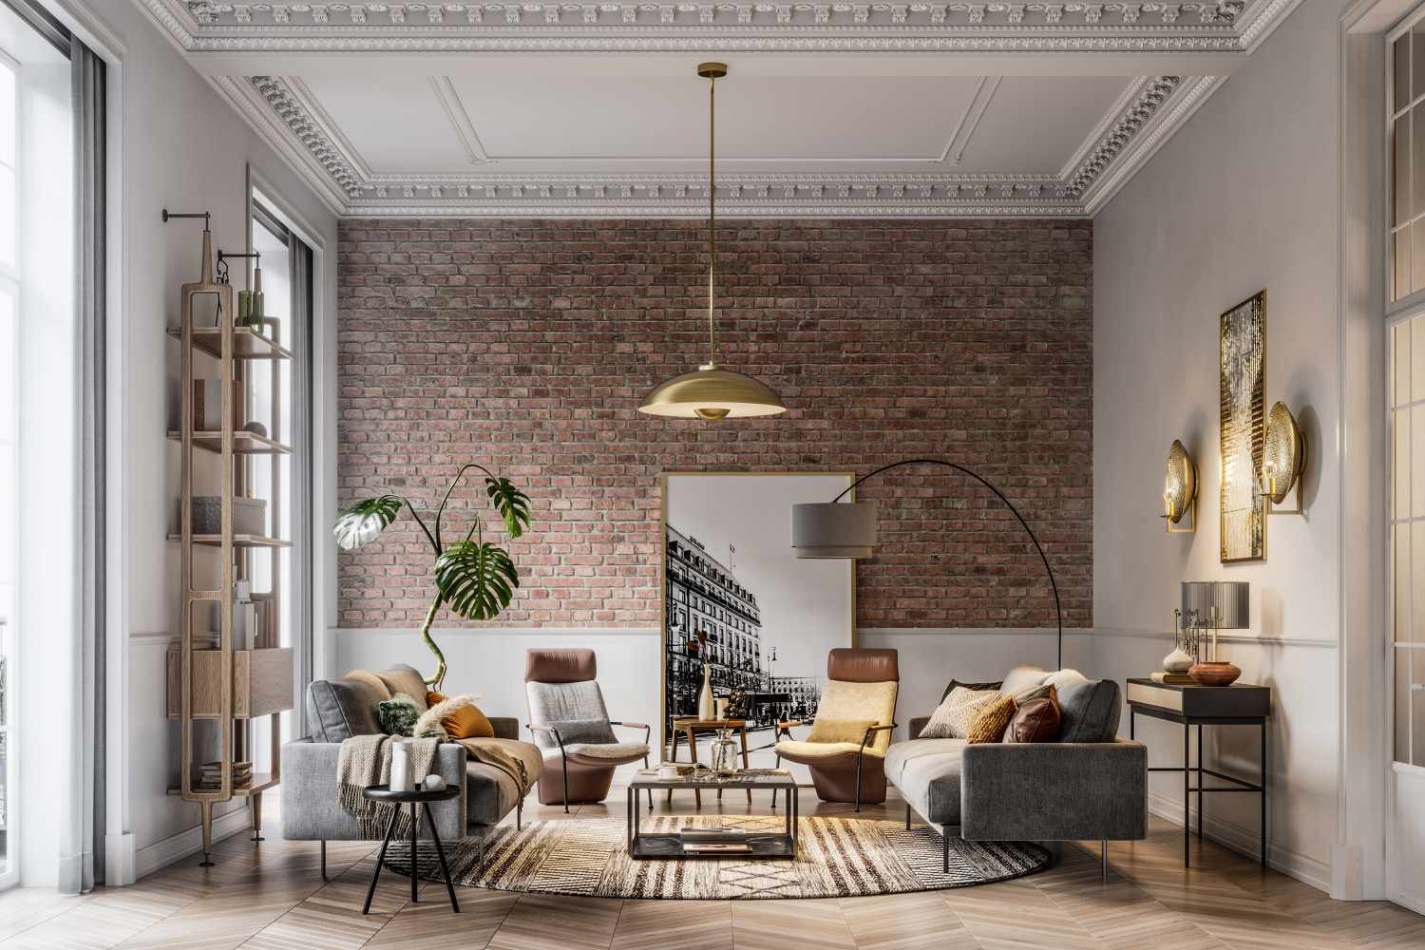 Get Creative And Add Personality To Your Space With Stylish Brick Wall Decor